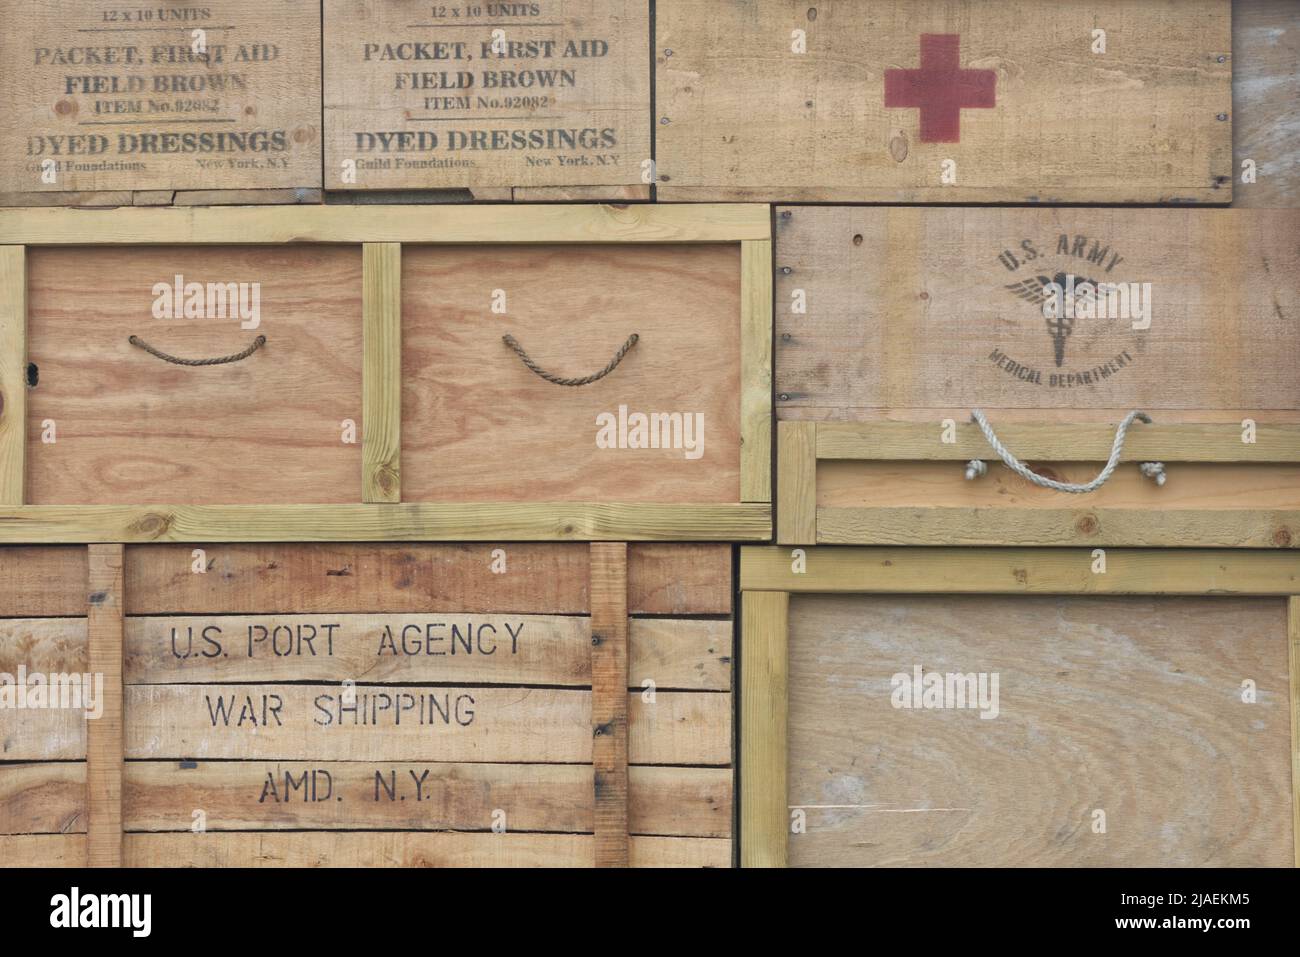 wooded boxes full of field dressings, US port war shipping containers Stock Photo